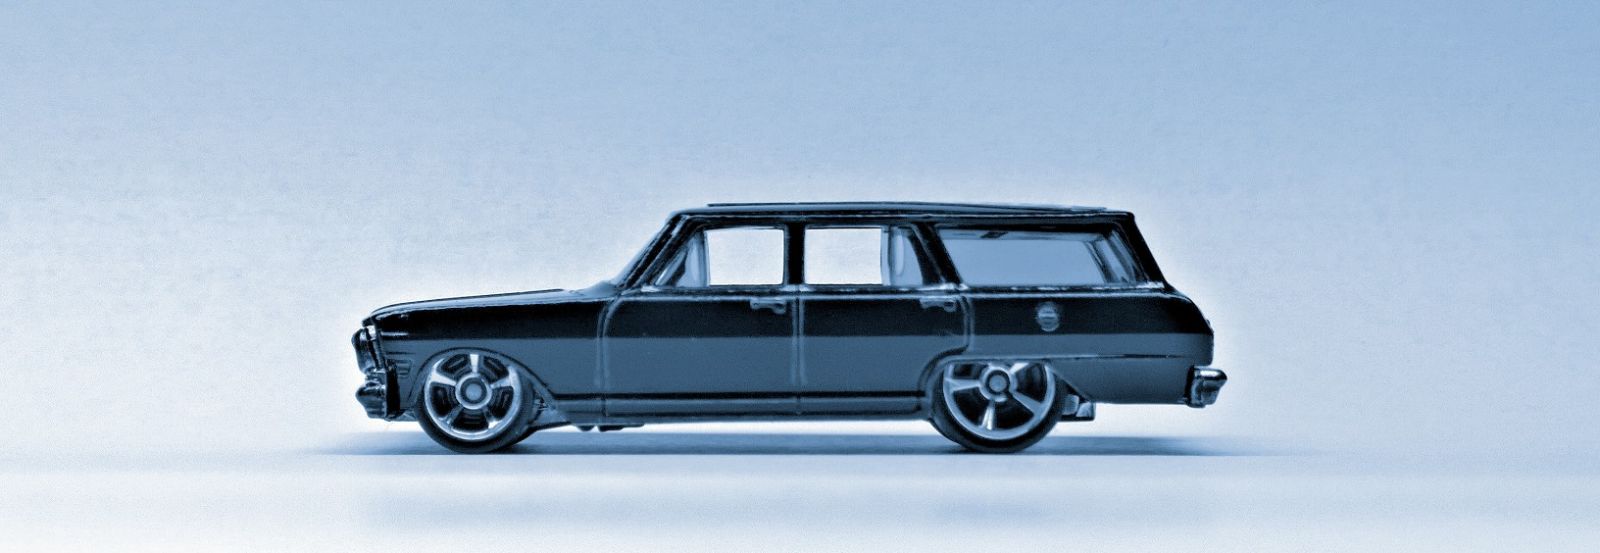 Illustration for article titled Custom 64 Nova Wagon and the van from Old School!!